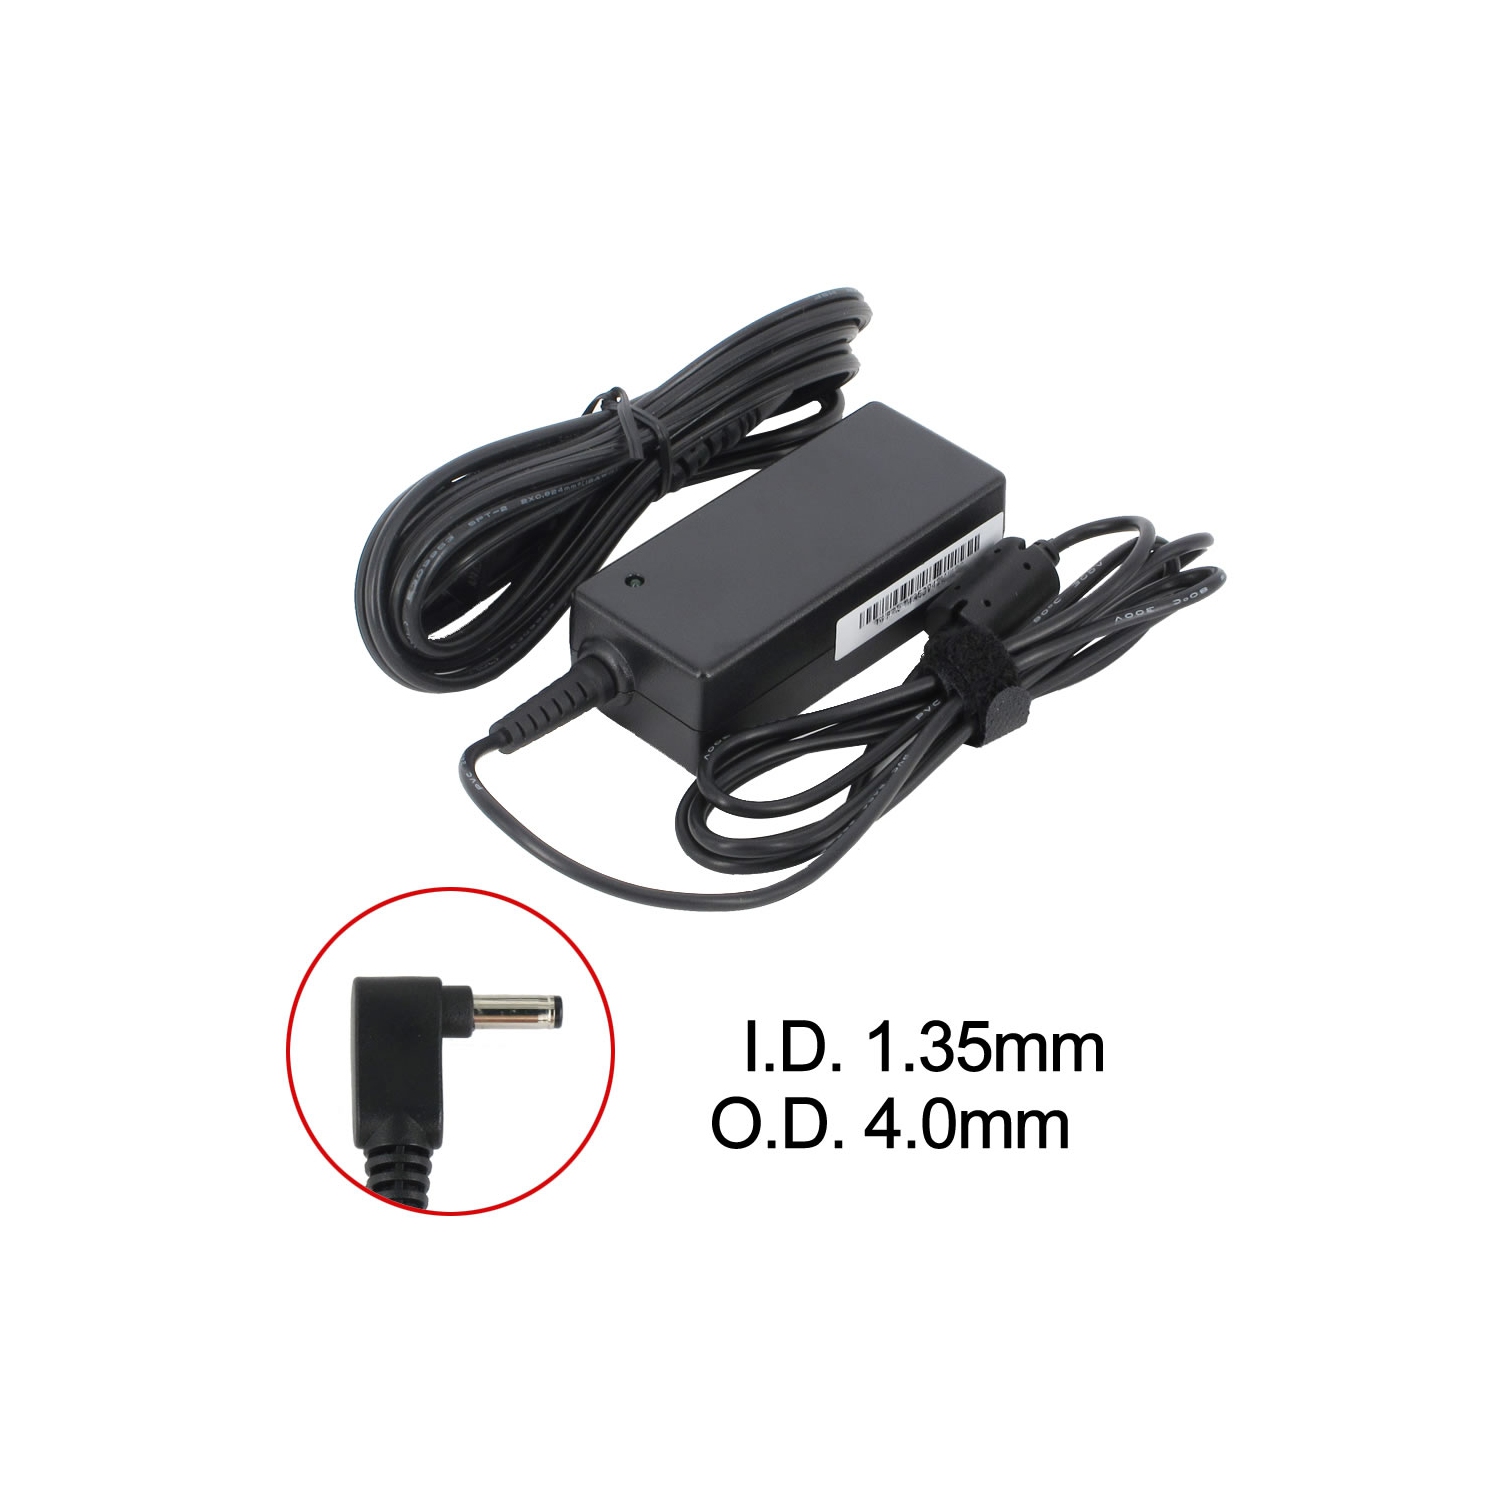 BattDepot: New Laptop AC Adapter for Asus EeeBook L402MA-WX0139T, 0A001-00232100, 0A001-00340200, EXA1206UH